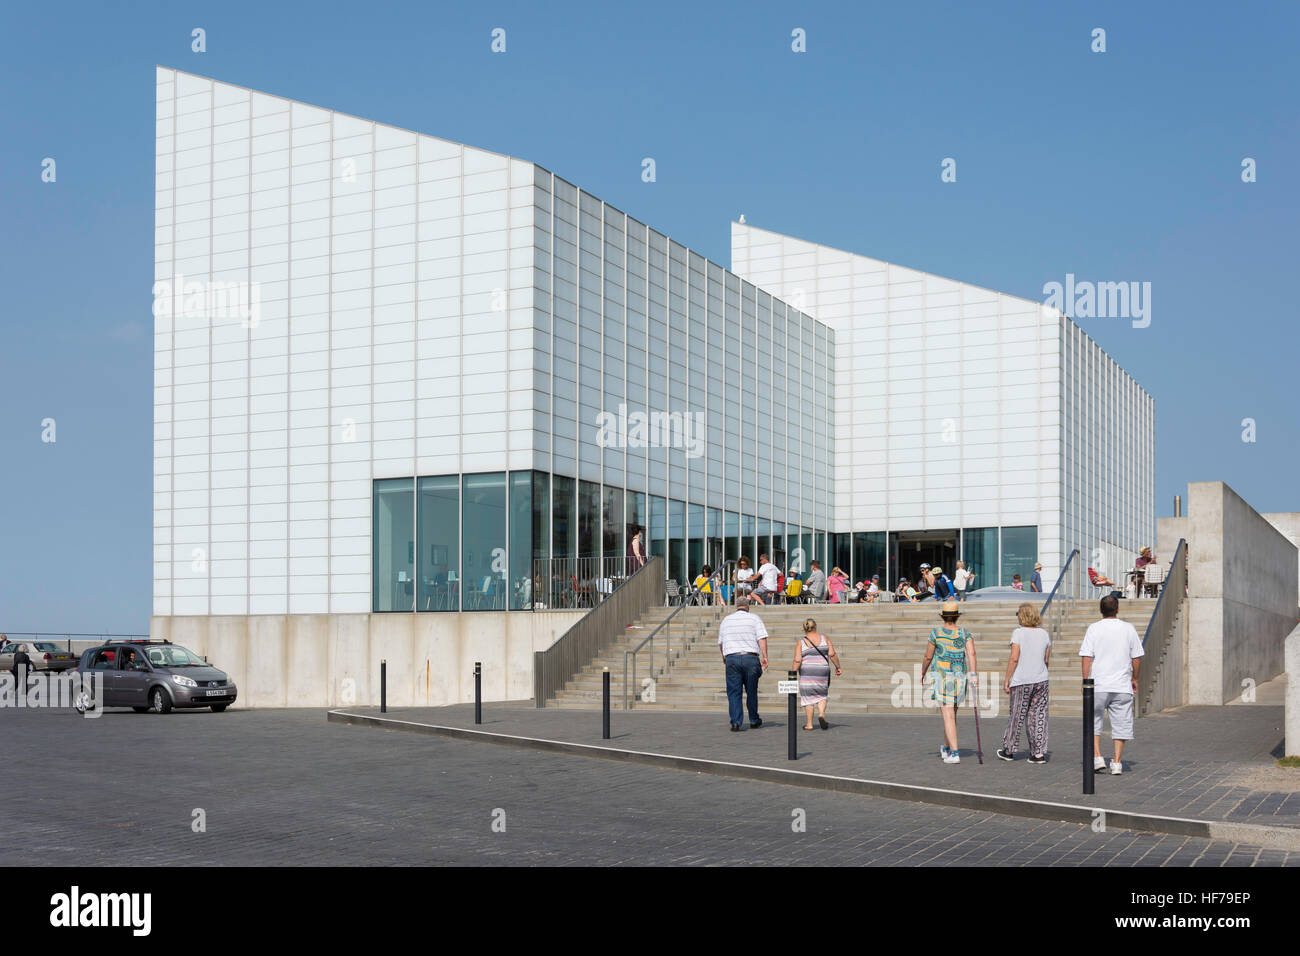 Turner Contemporary Gallery, The Rendezvous, Margate, Kent, England, United Kingdom Stock Photo